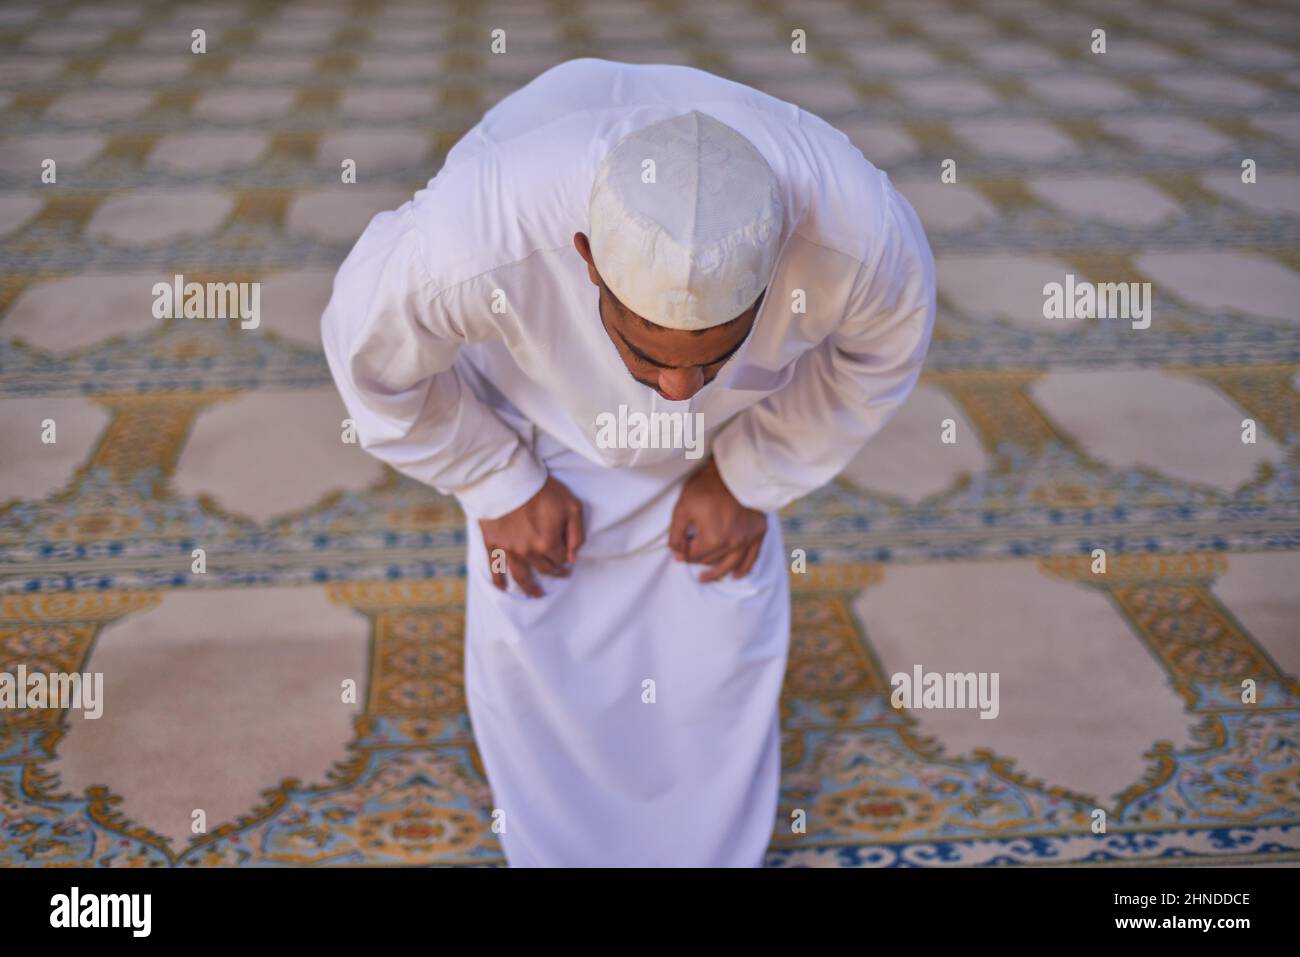 A Muslim man bowing during prayers at a mosque Stock Photo